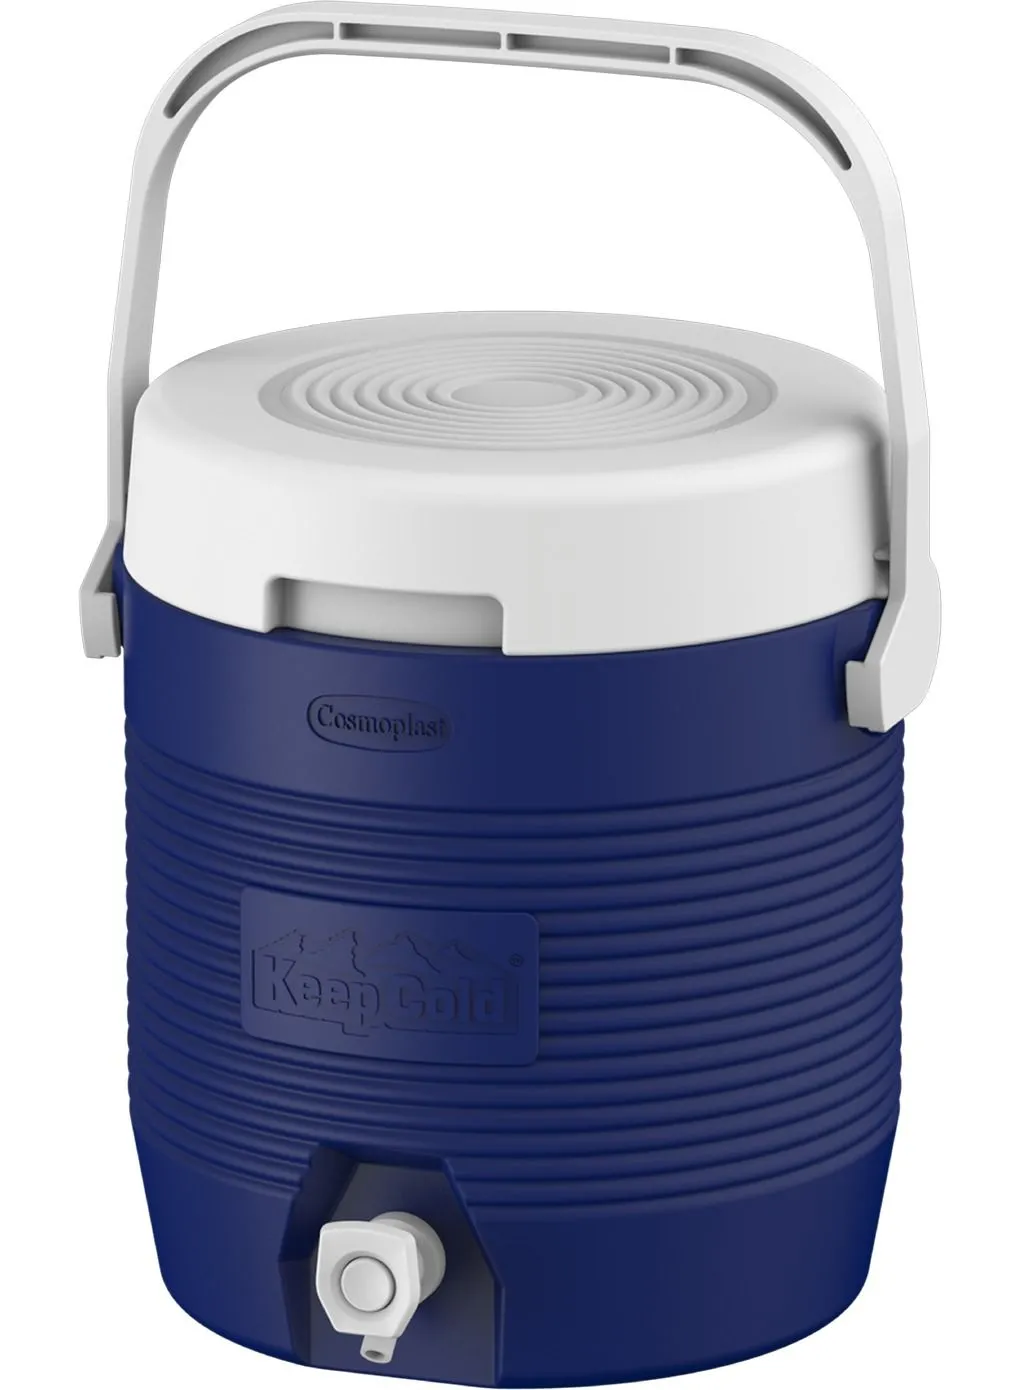 Cosmoplast 6L KeepCold Water Cooler Small